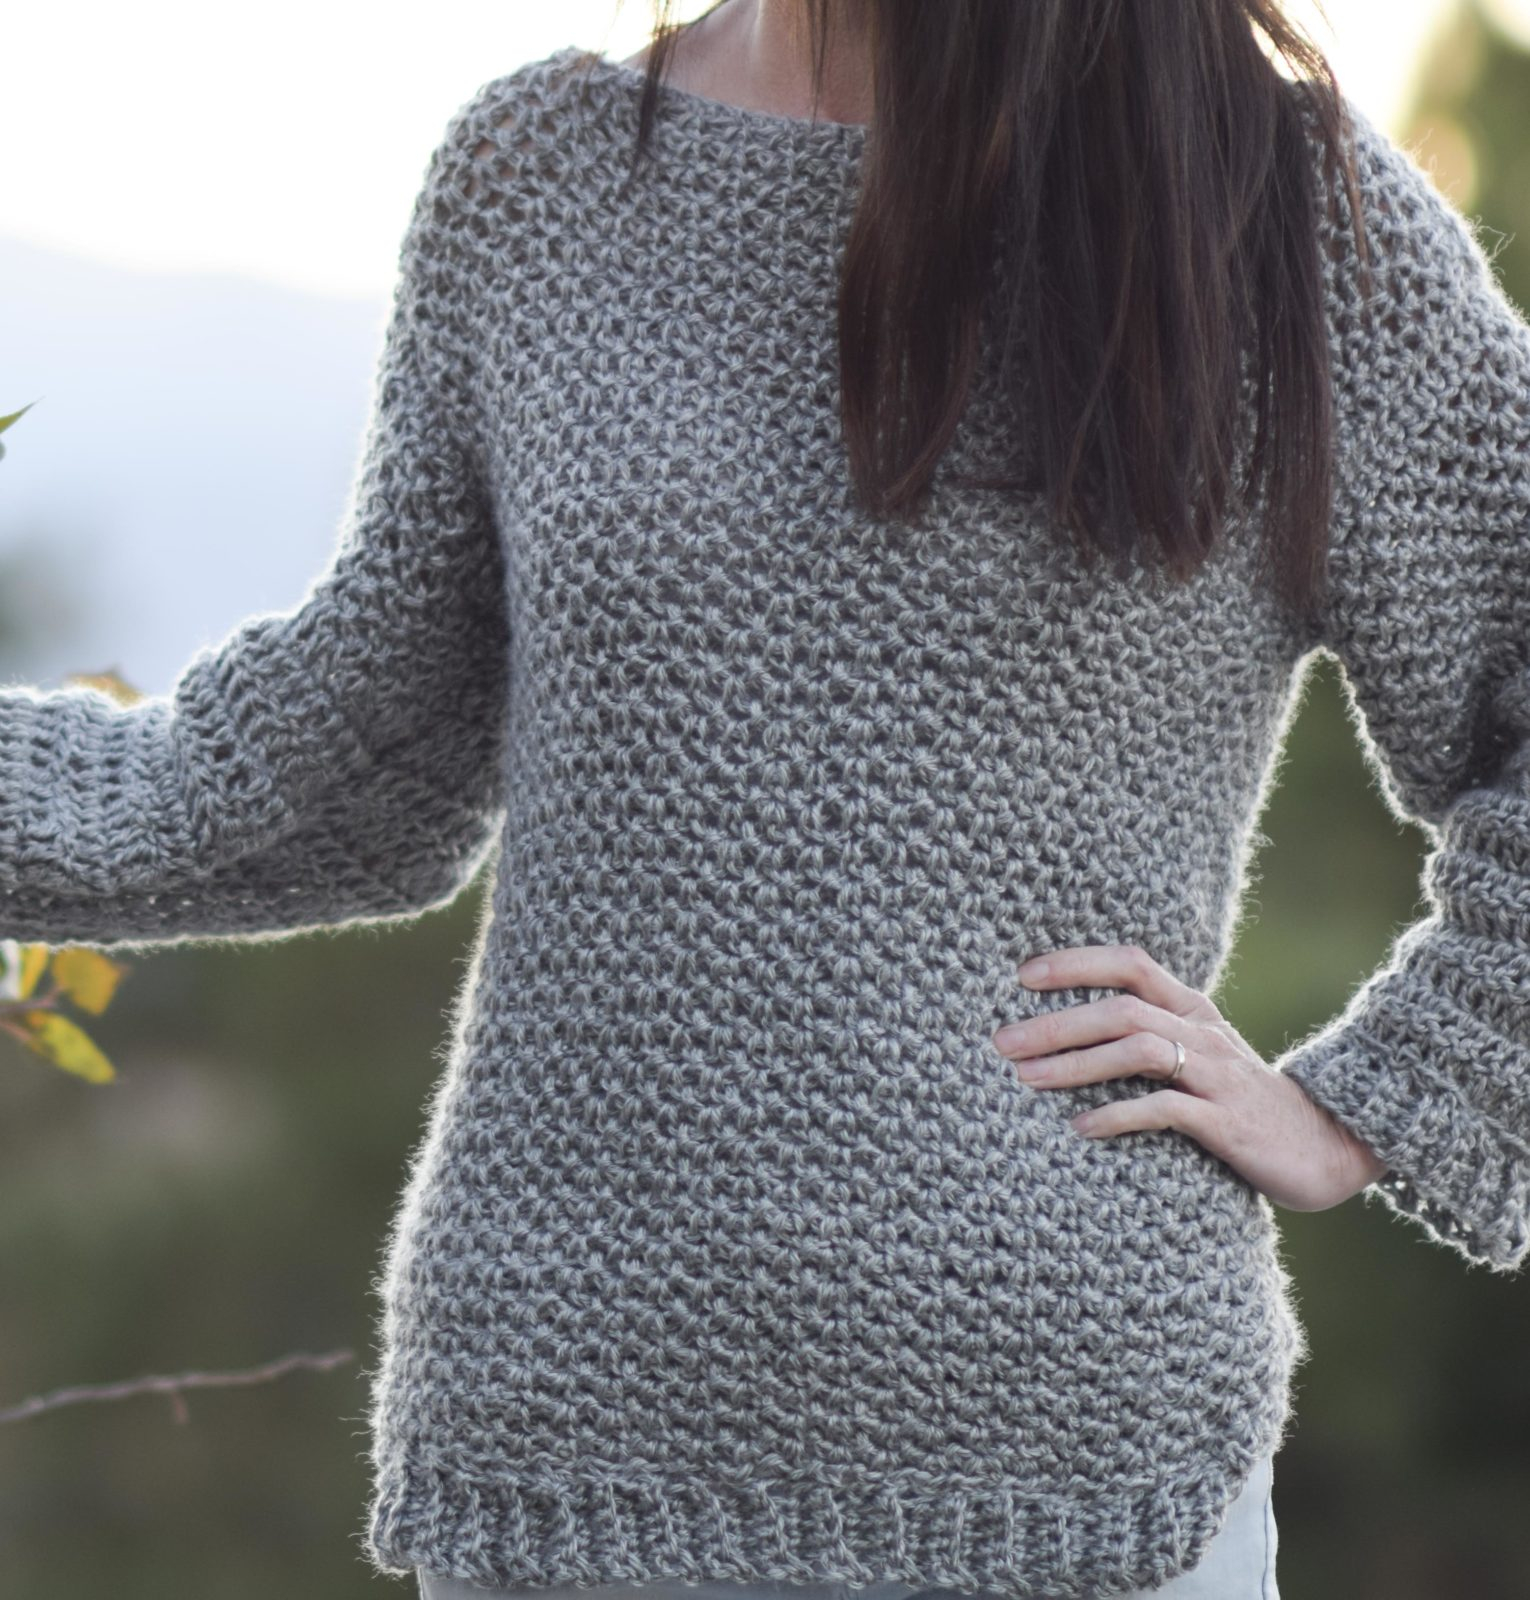 Off The Shoulder Sweater Knitting Pattern How To Make An Easy Crocheted Sweater Knit Like Mama In A Stitch